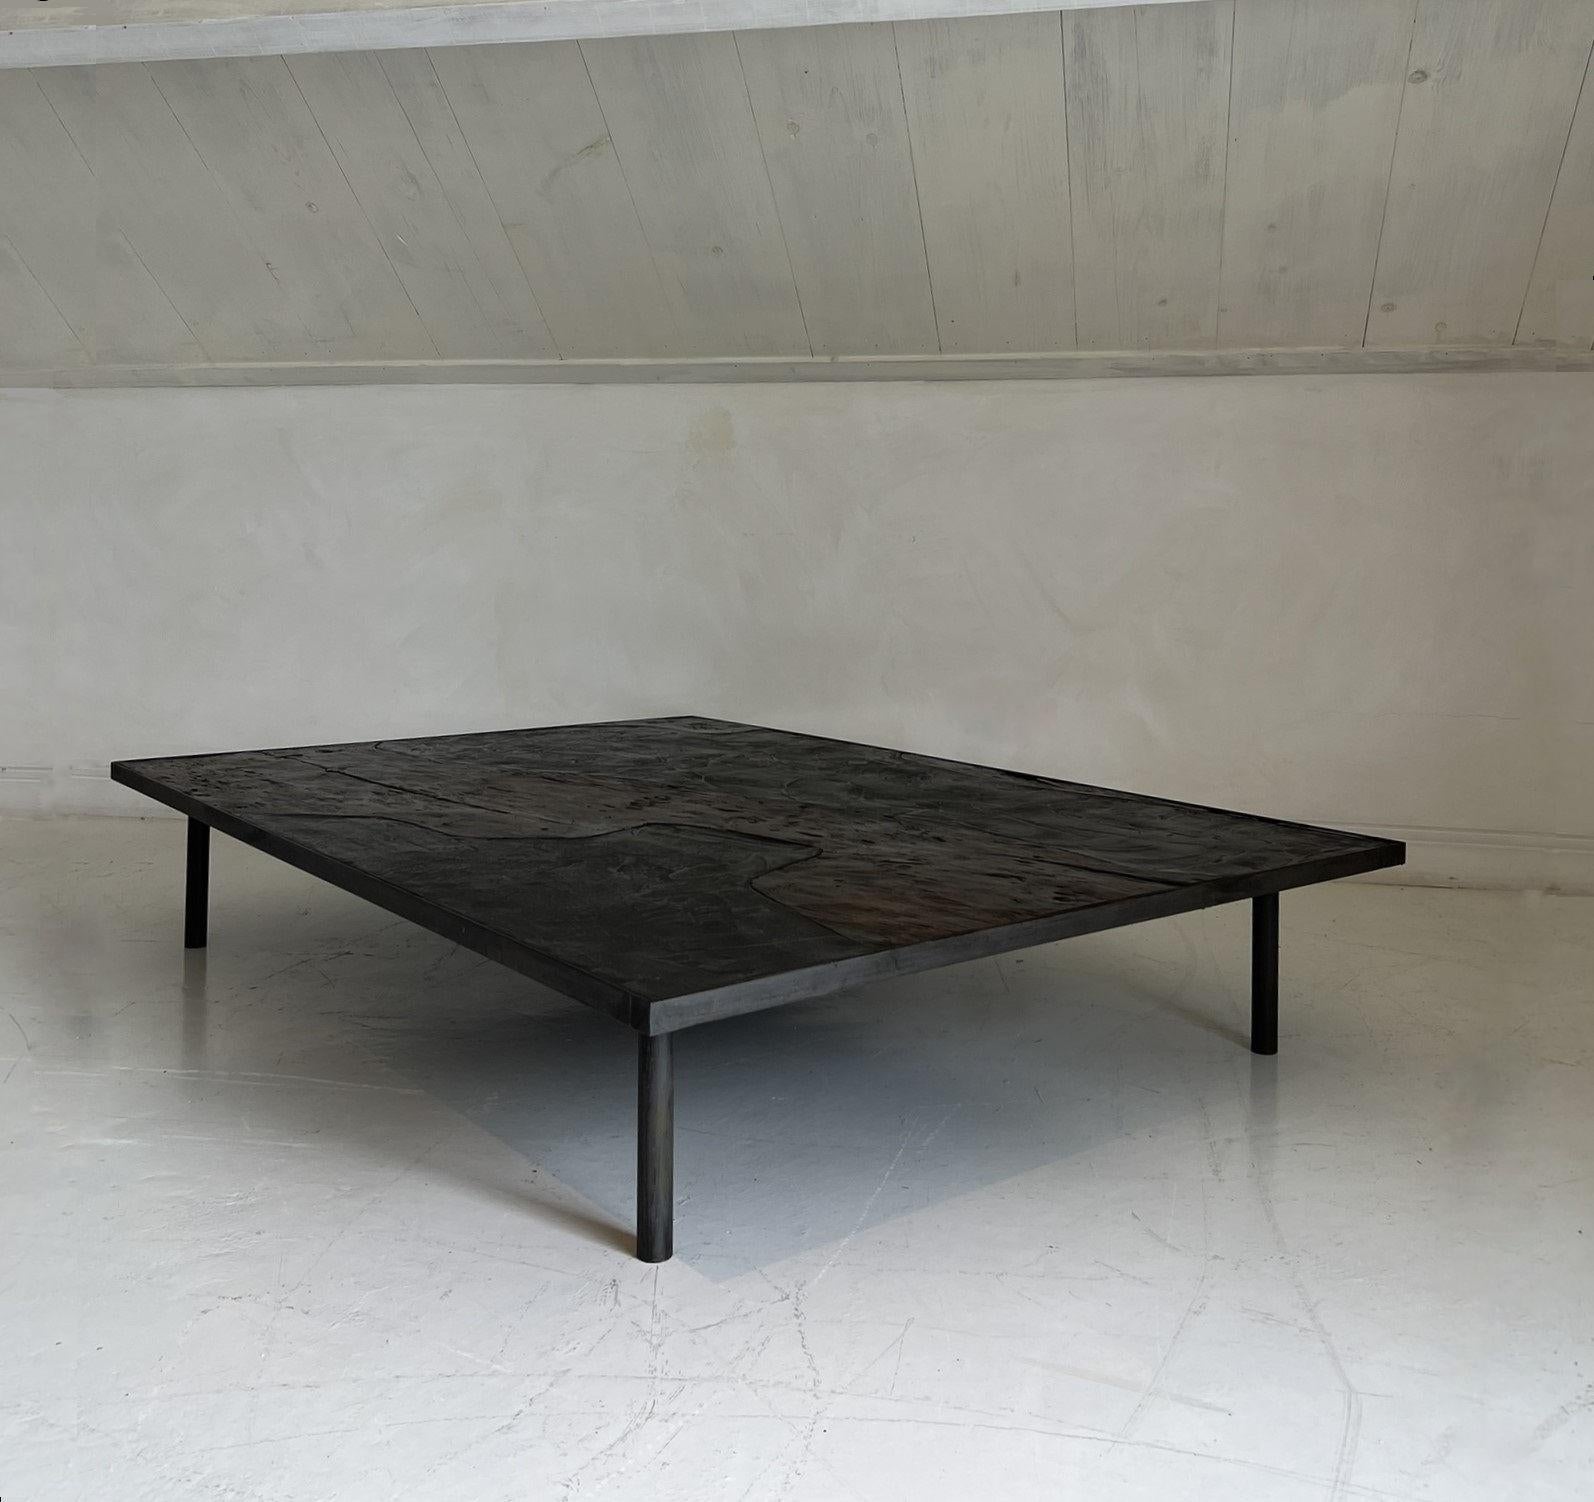 Plaster Our Luna Coffeetable with Reclaimed Walnut and Marbleplaster